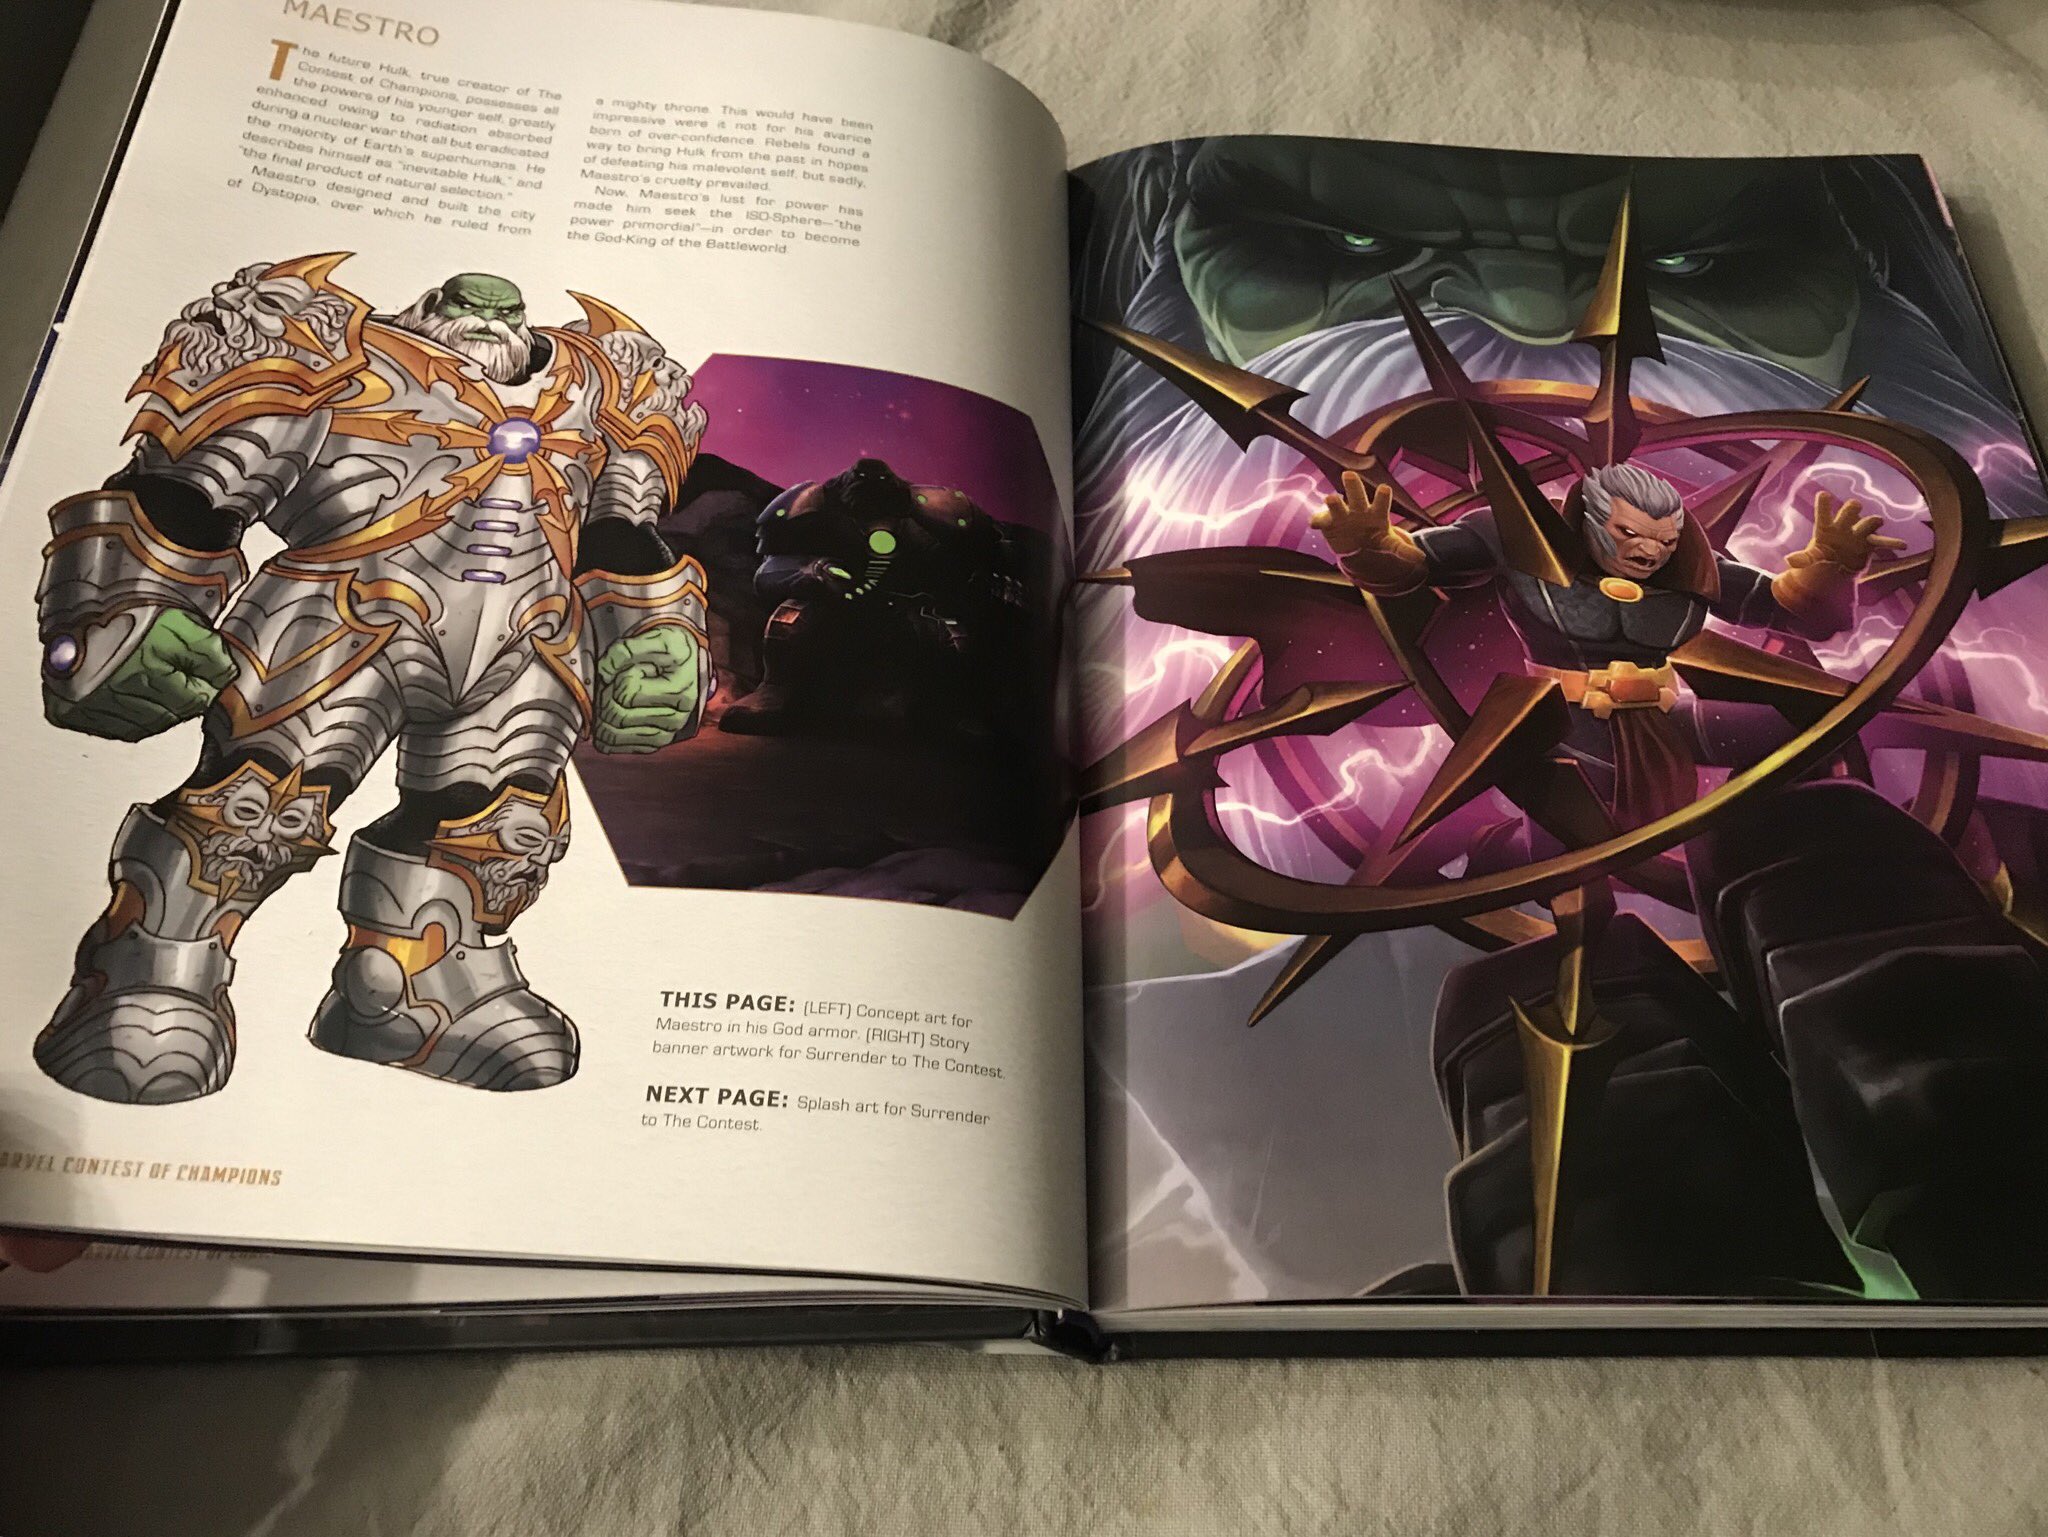 Gabriel Frizzera on Twitter: "Got my of the Art Book, Just in time for 4th Nothing like seeing your work materialized in a beautiful volume like this... thanks